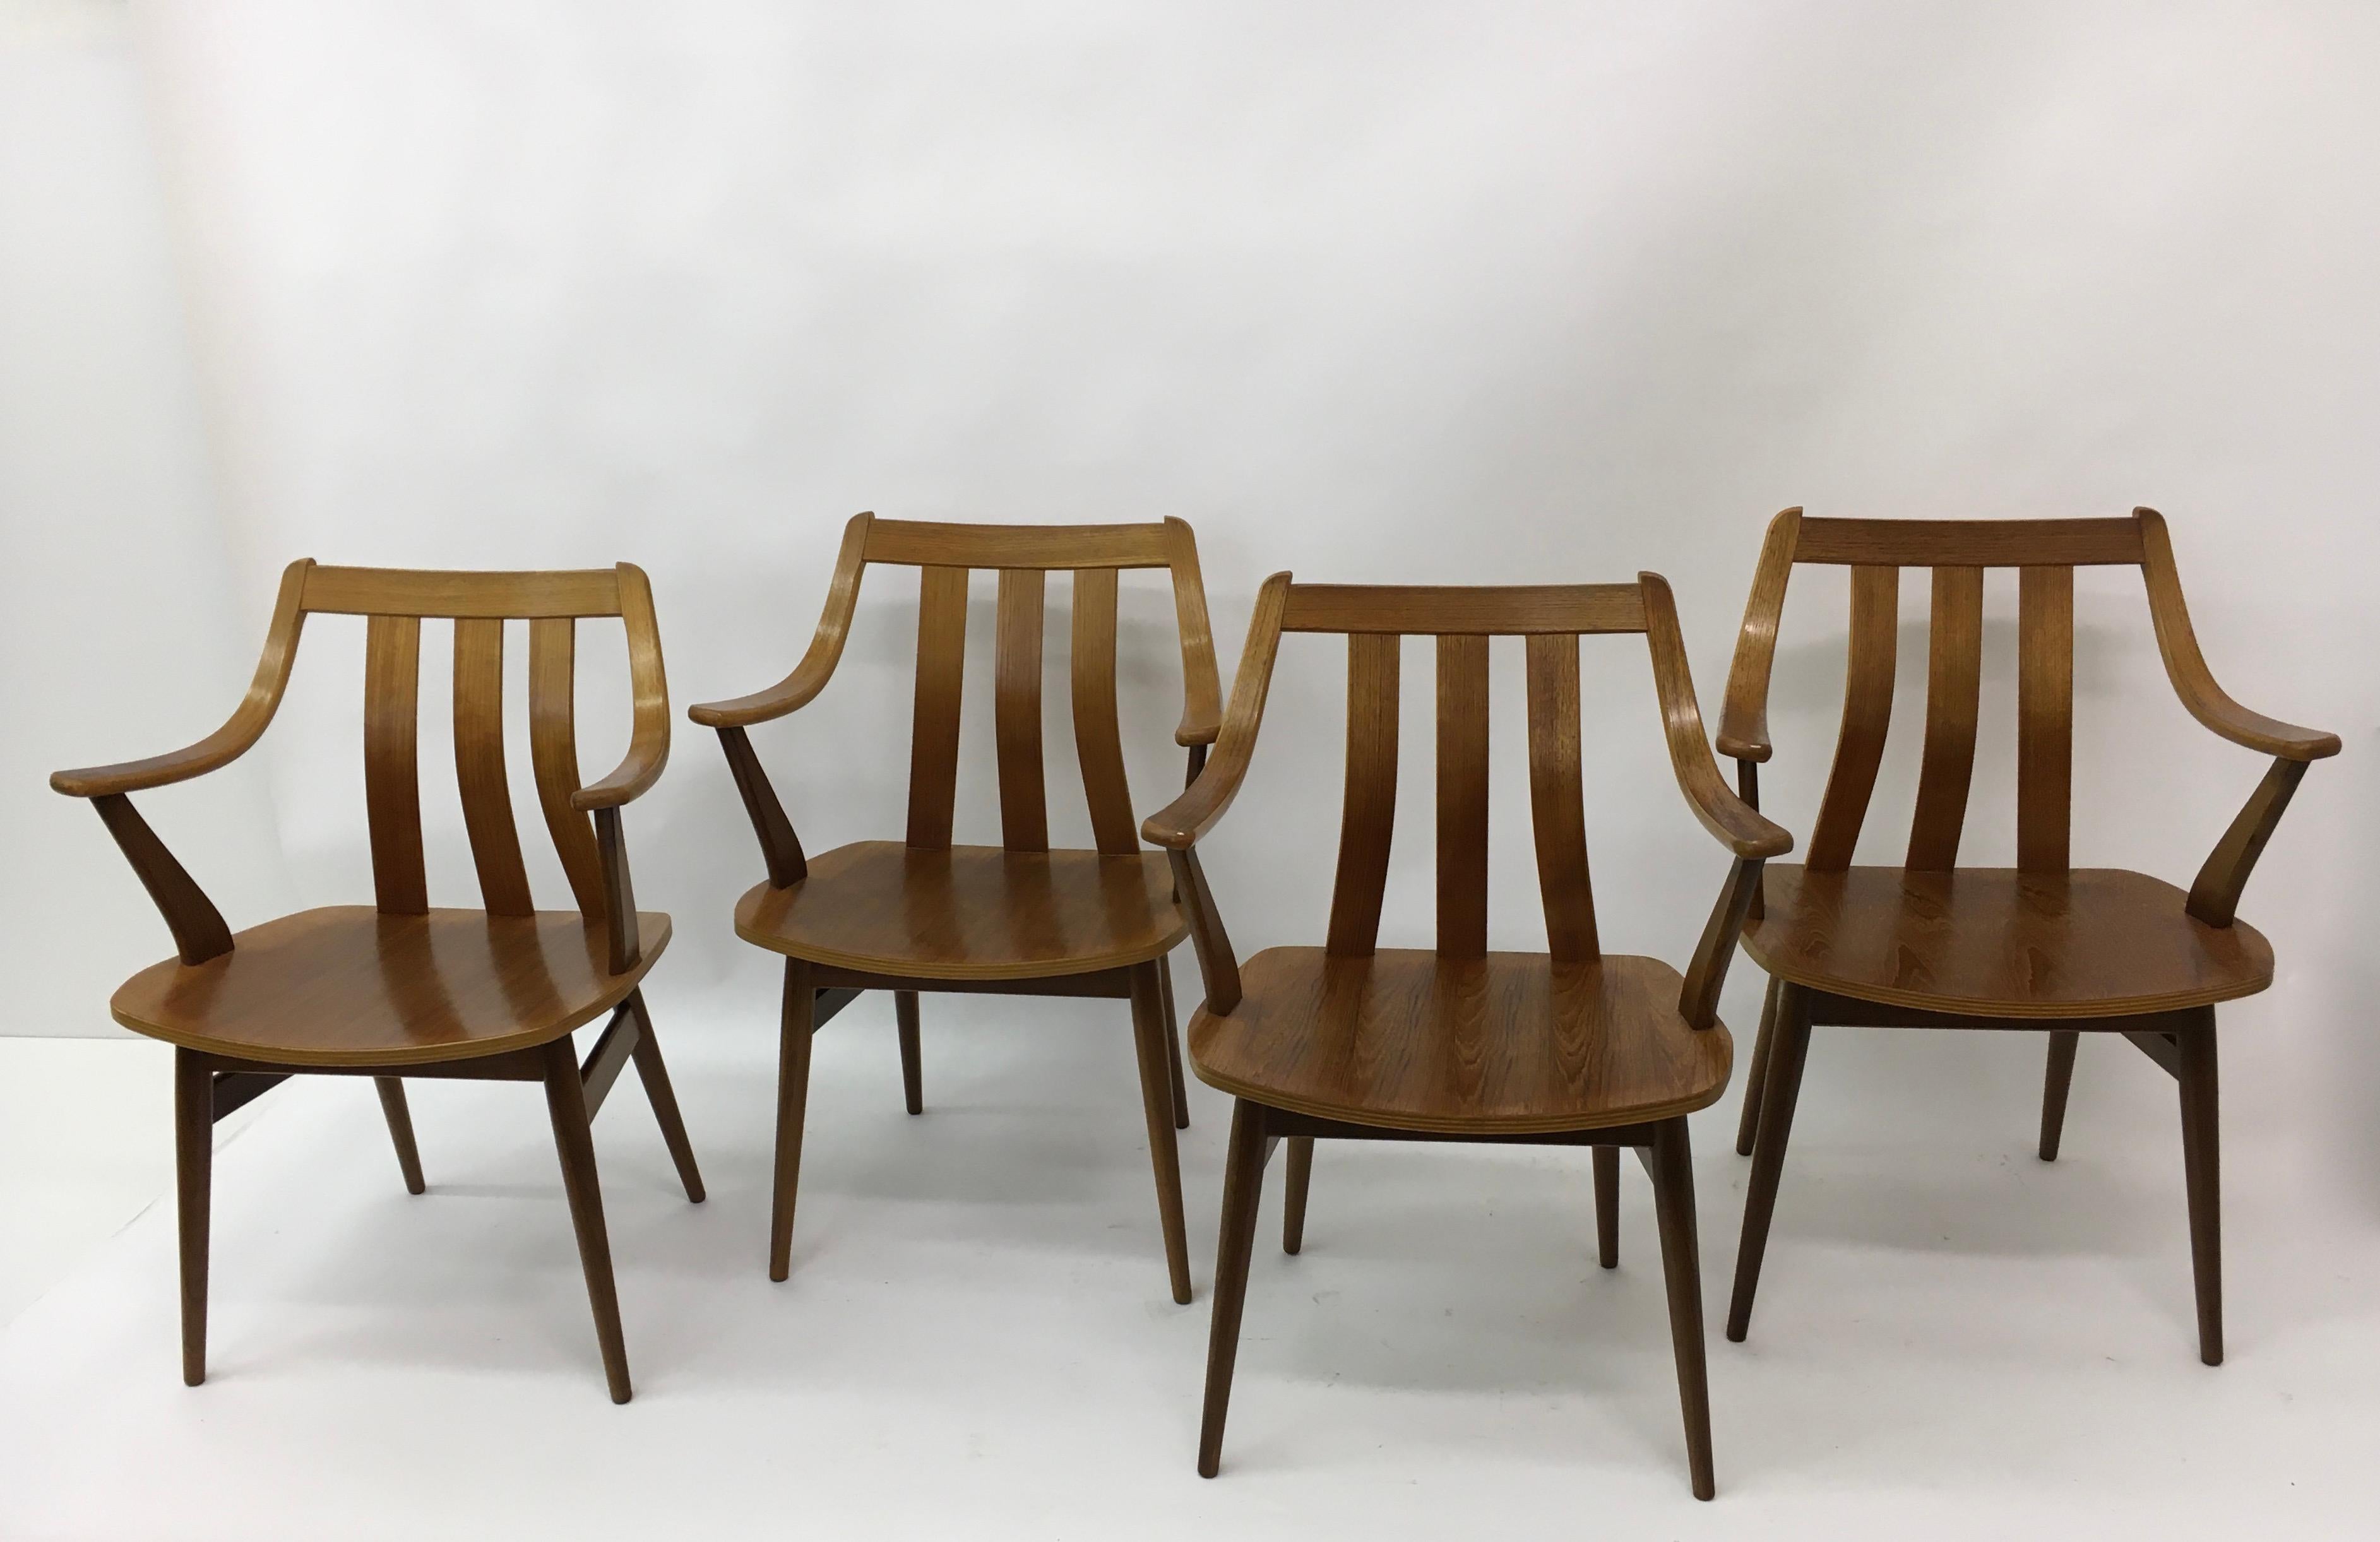 SET OF 4 TEAK PLYWOOD DINING CHAIRS ATTR. PASTOE, 1960’s

Dimensions: 60cm W , 47cm D, 44cm H seat, 67,5cm H armrest82cm H total
Designer: Unknown
Manufacturer: attributed PASTOE
Country: Dutch
Material: Teak solid and plywood
Design period: